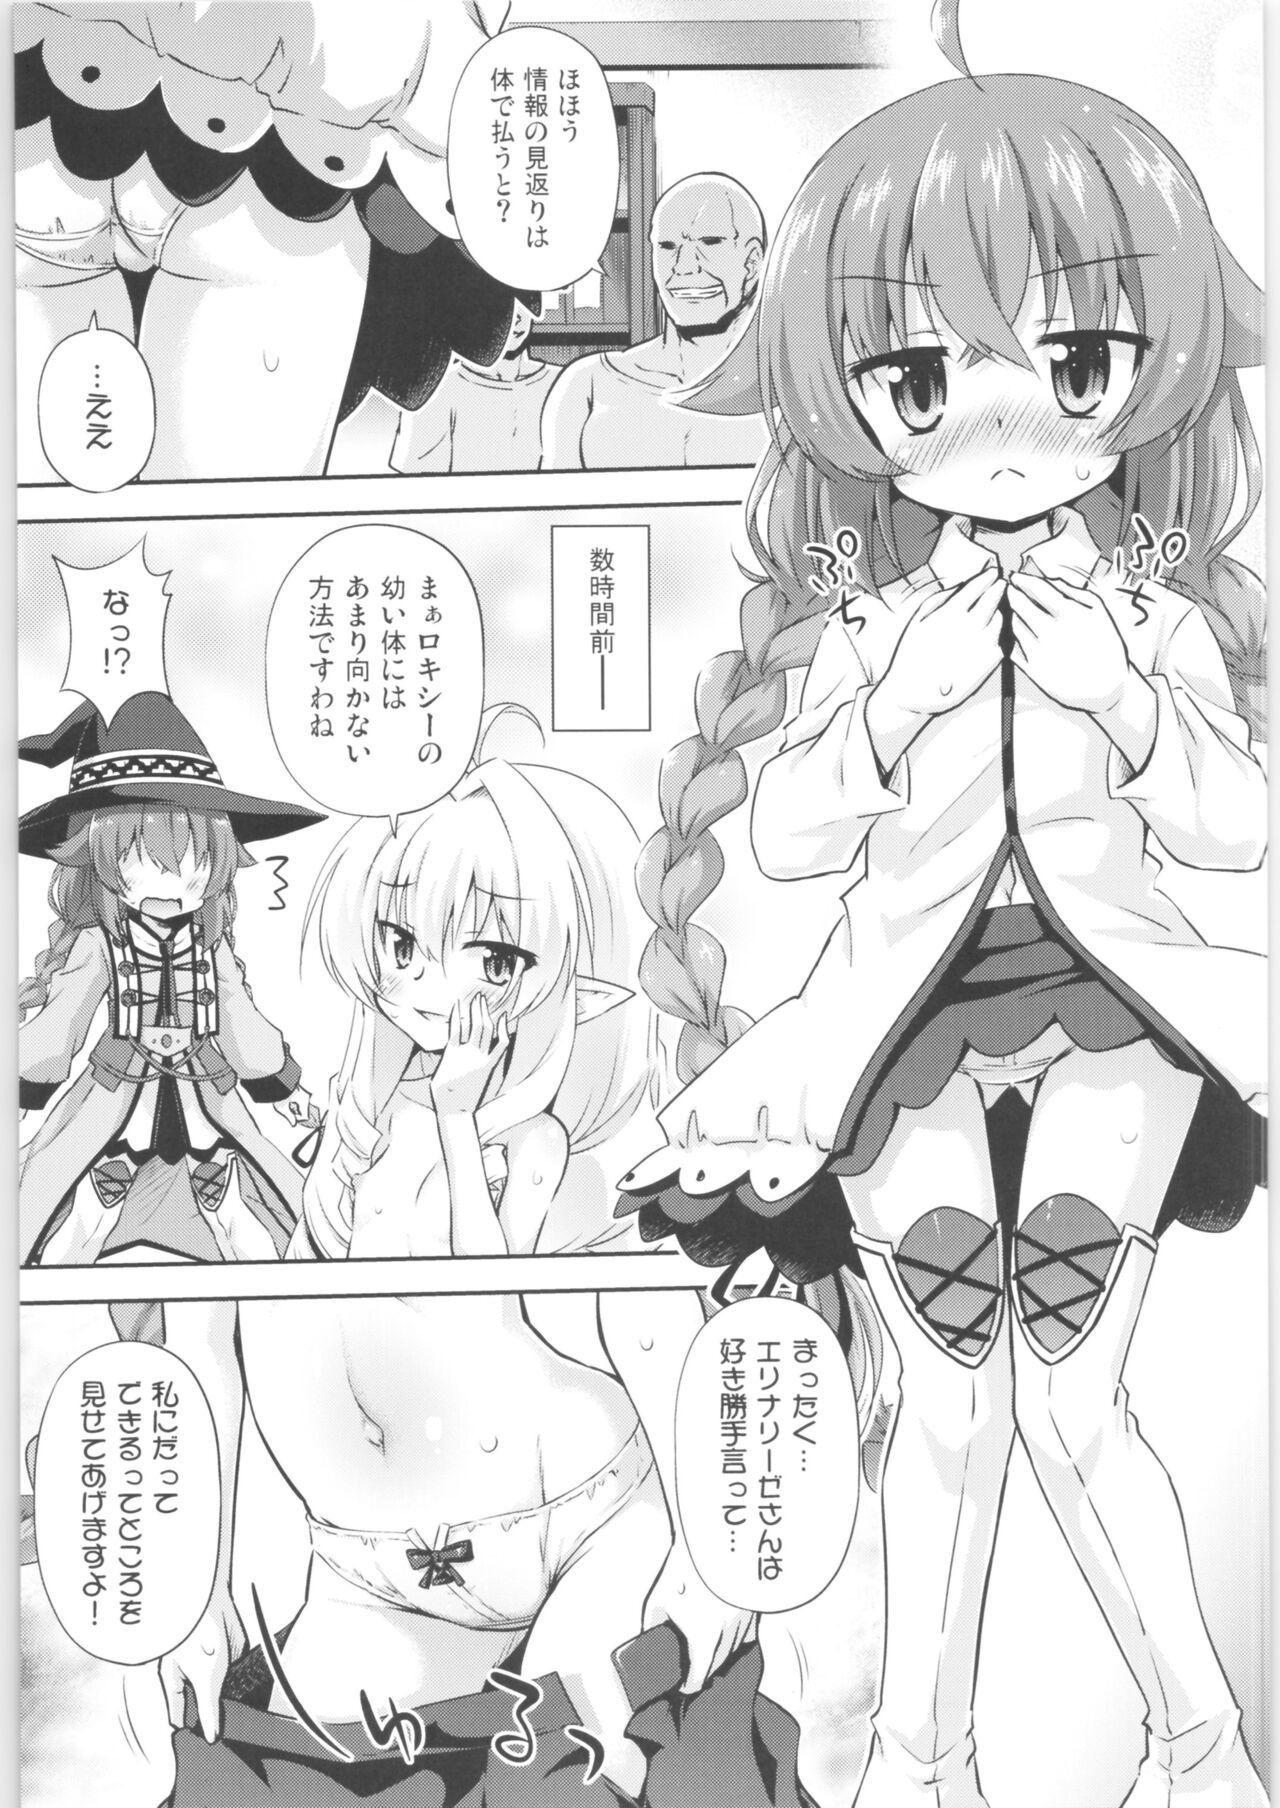 American The Information Fee is My Body! - Mushoku tensei Young - Page 3